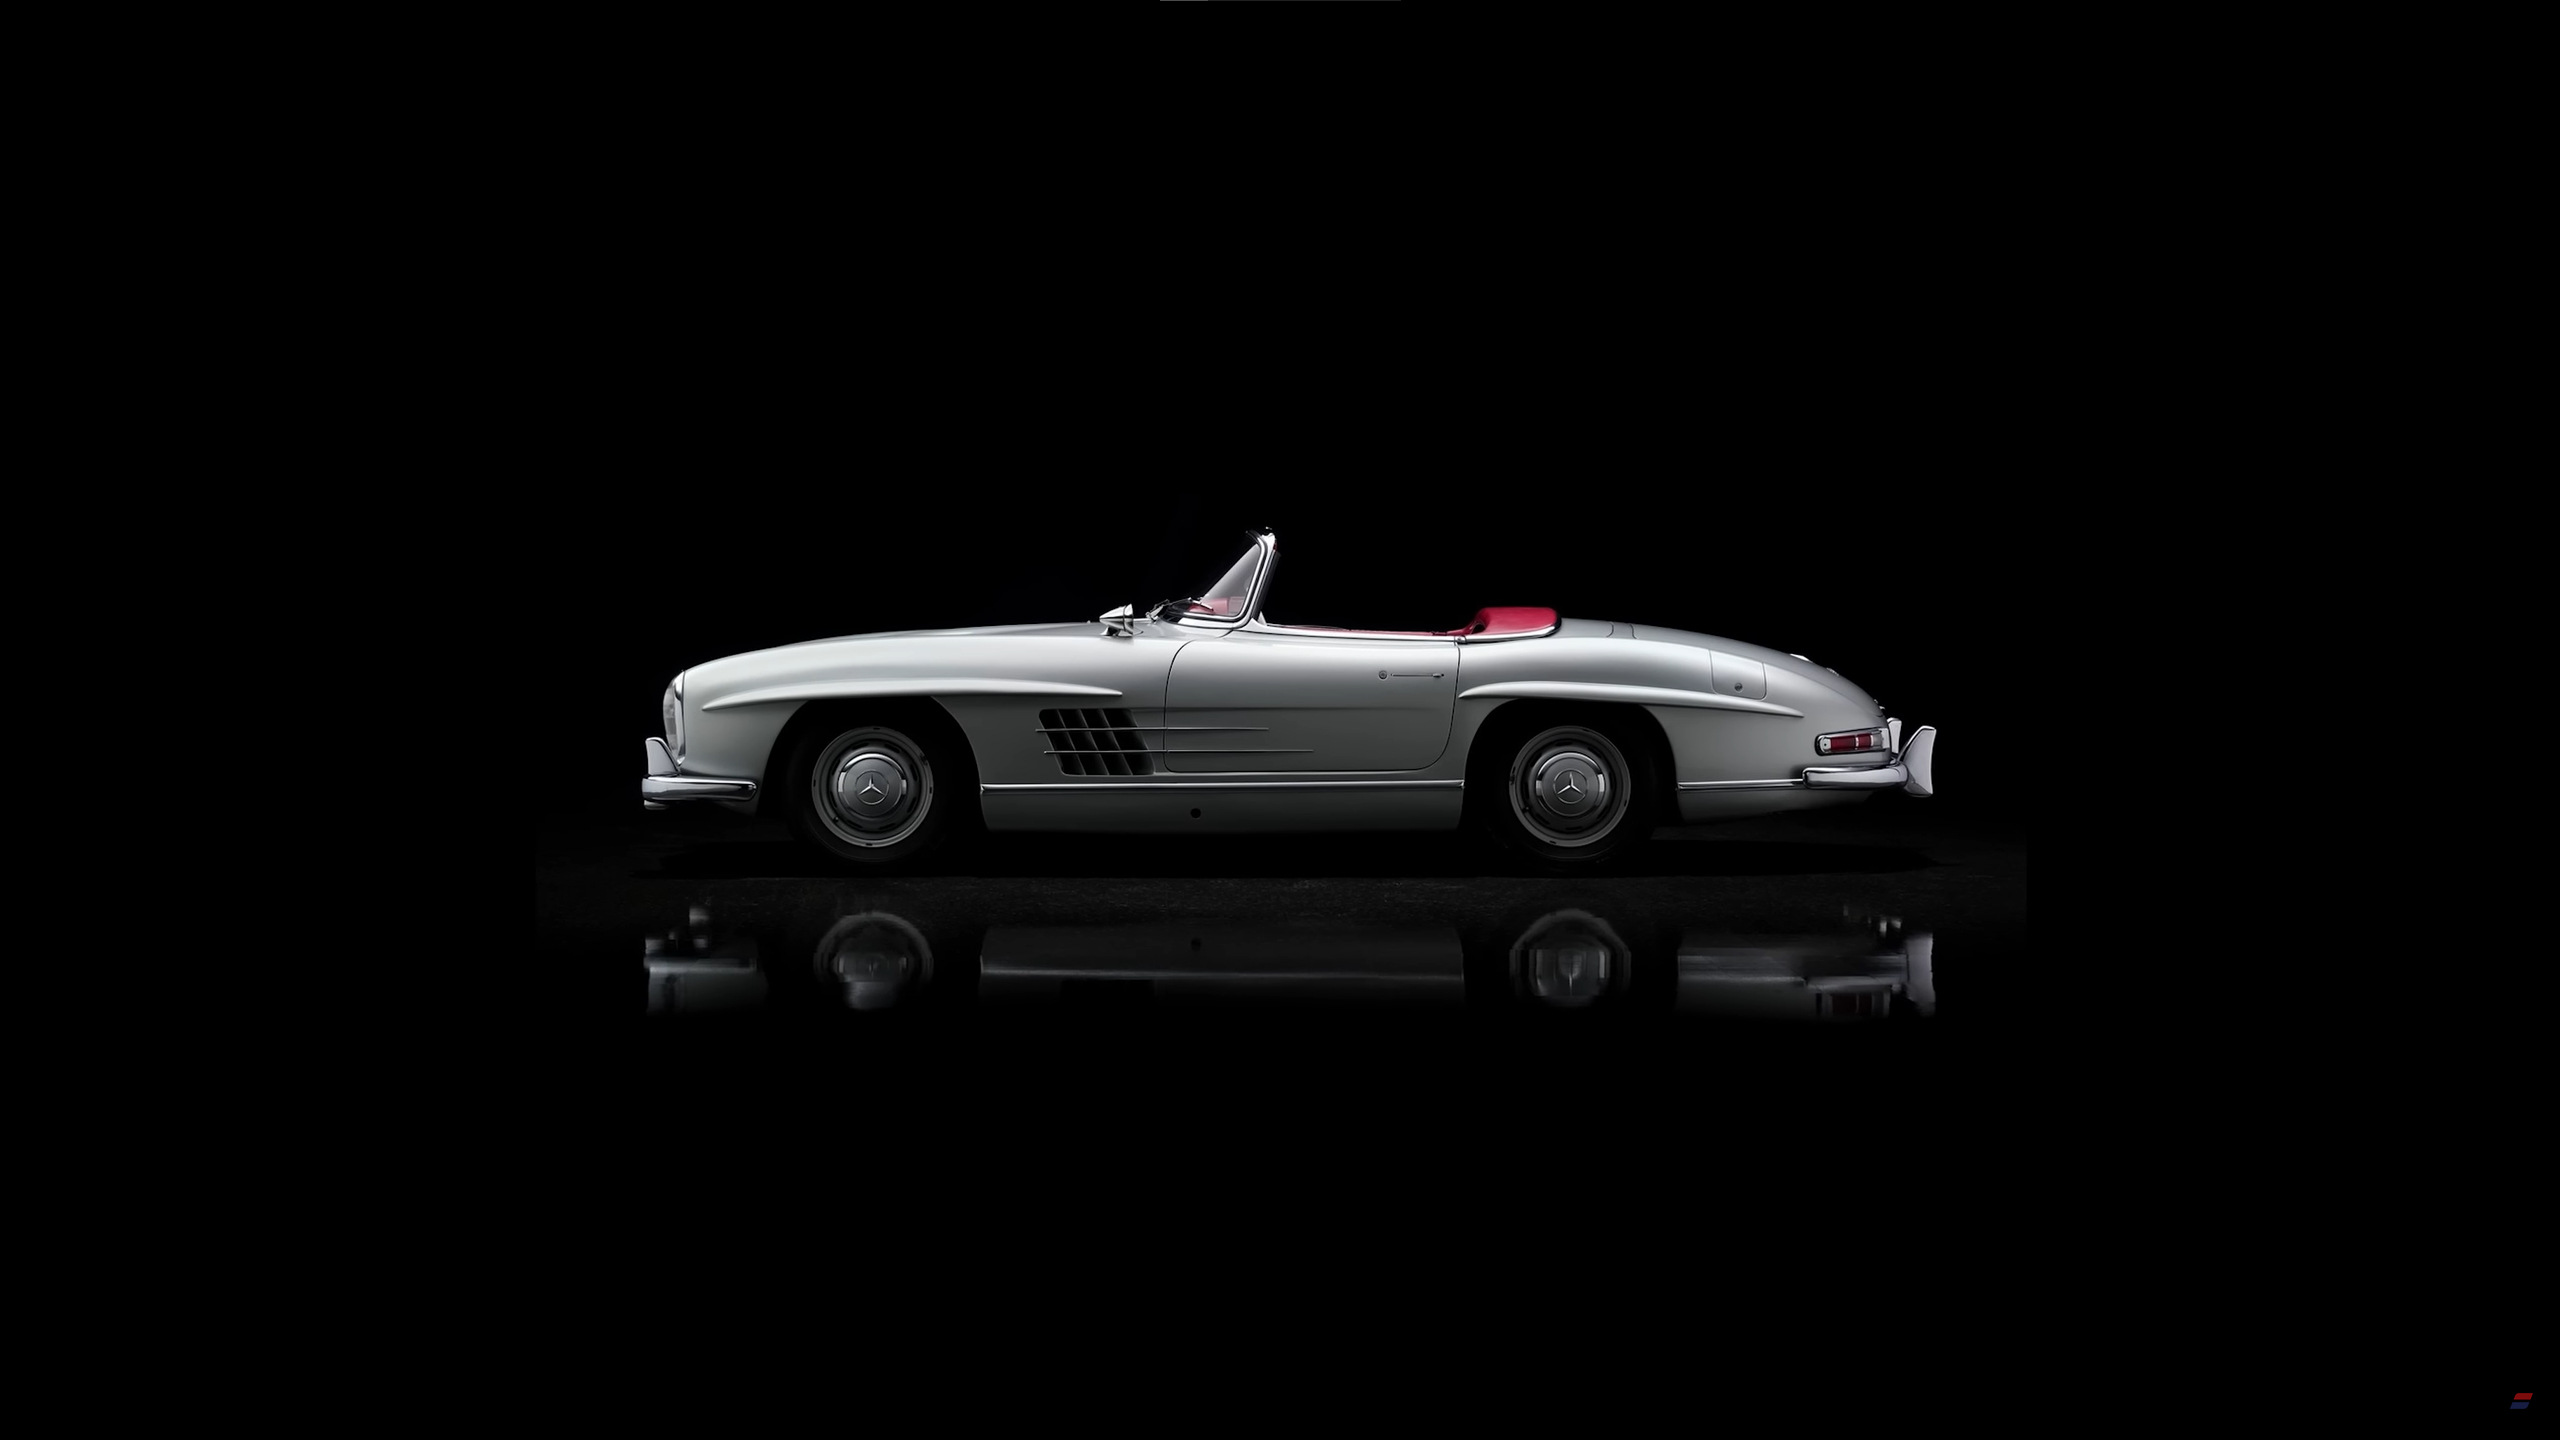 Mercedes Benz SL Car Vehicle Black Background Silver Roadster Side View Reflection Simple Background 2560x1440